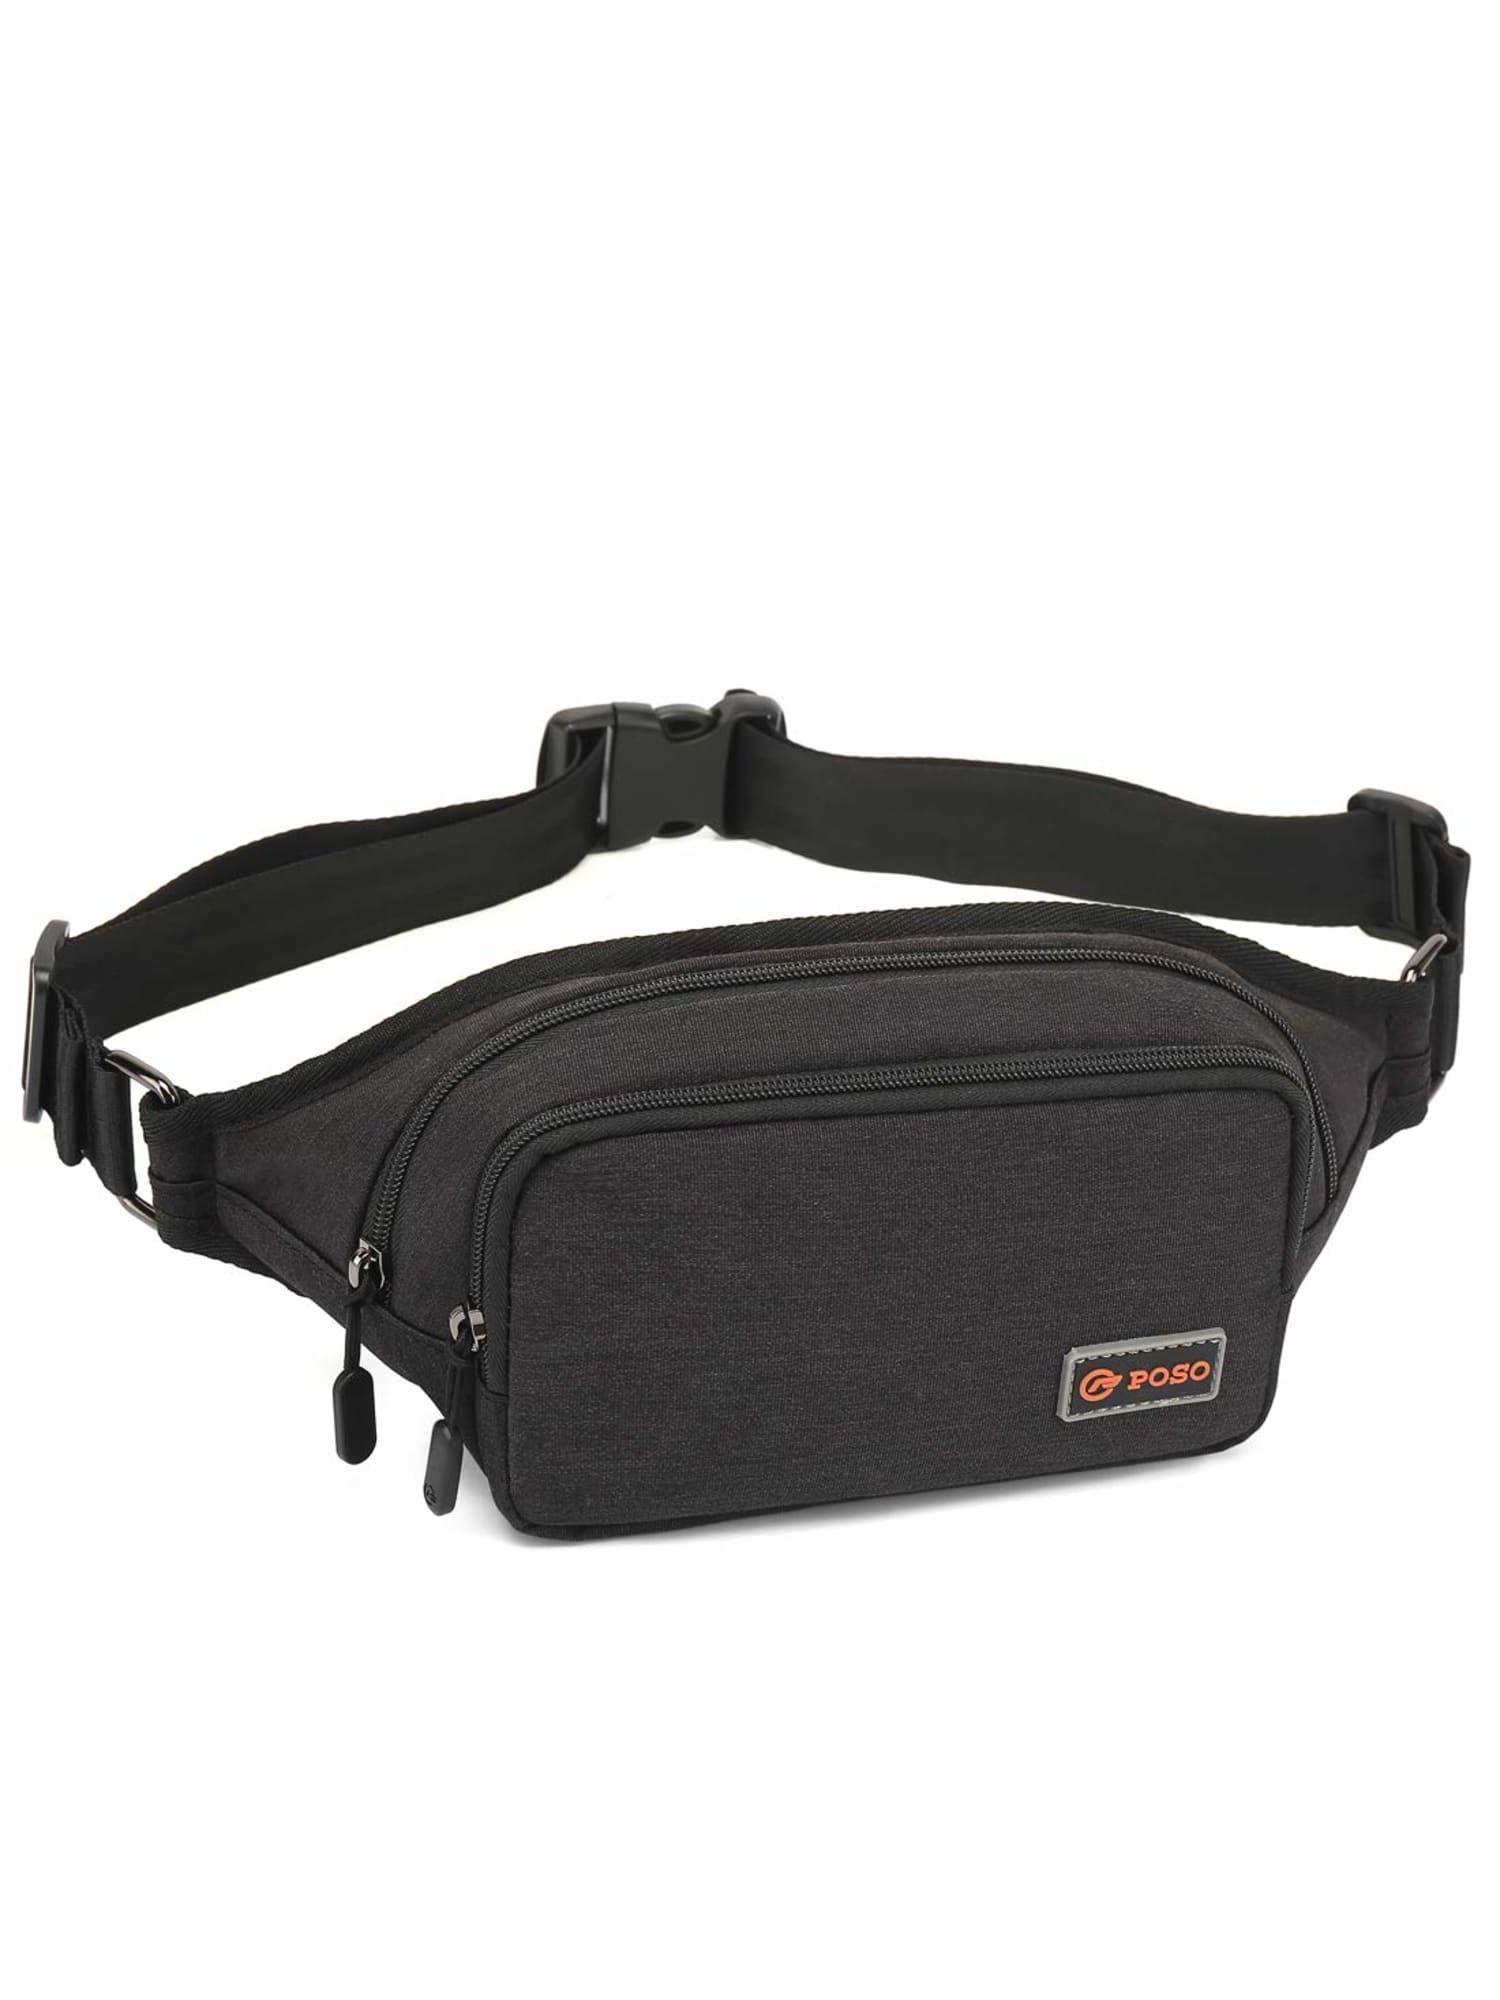 nylon waist bag travel pouch with adjustable strap - black